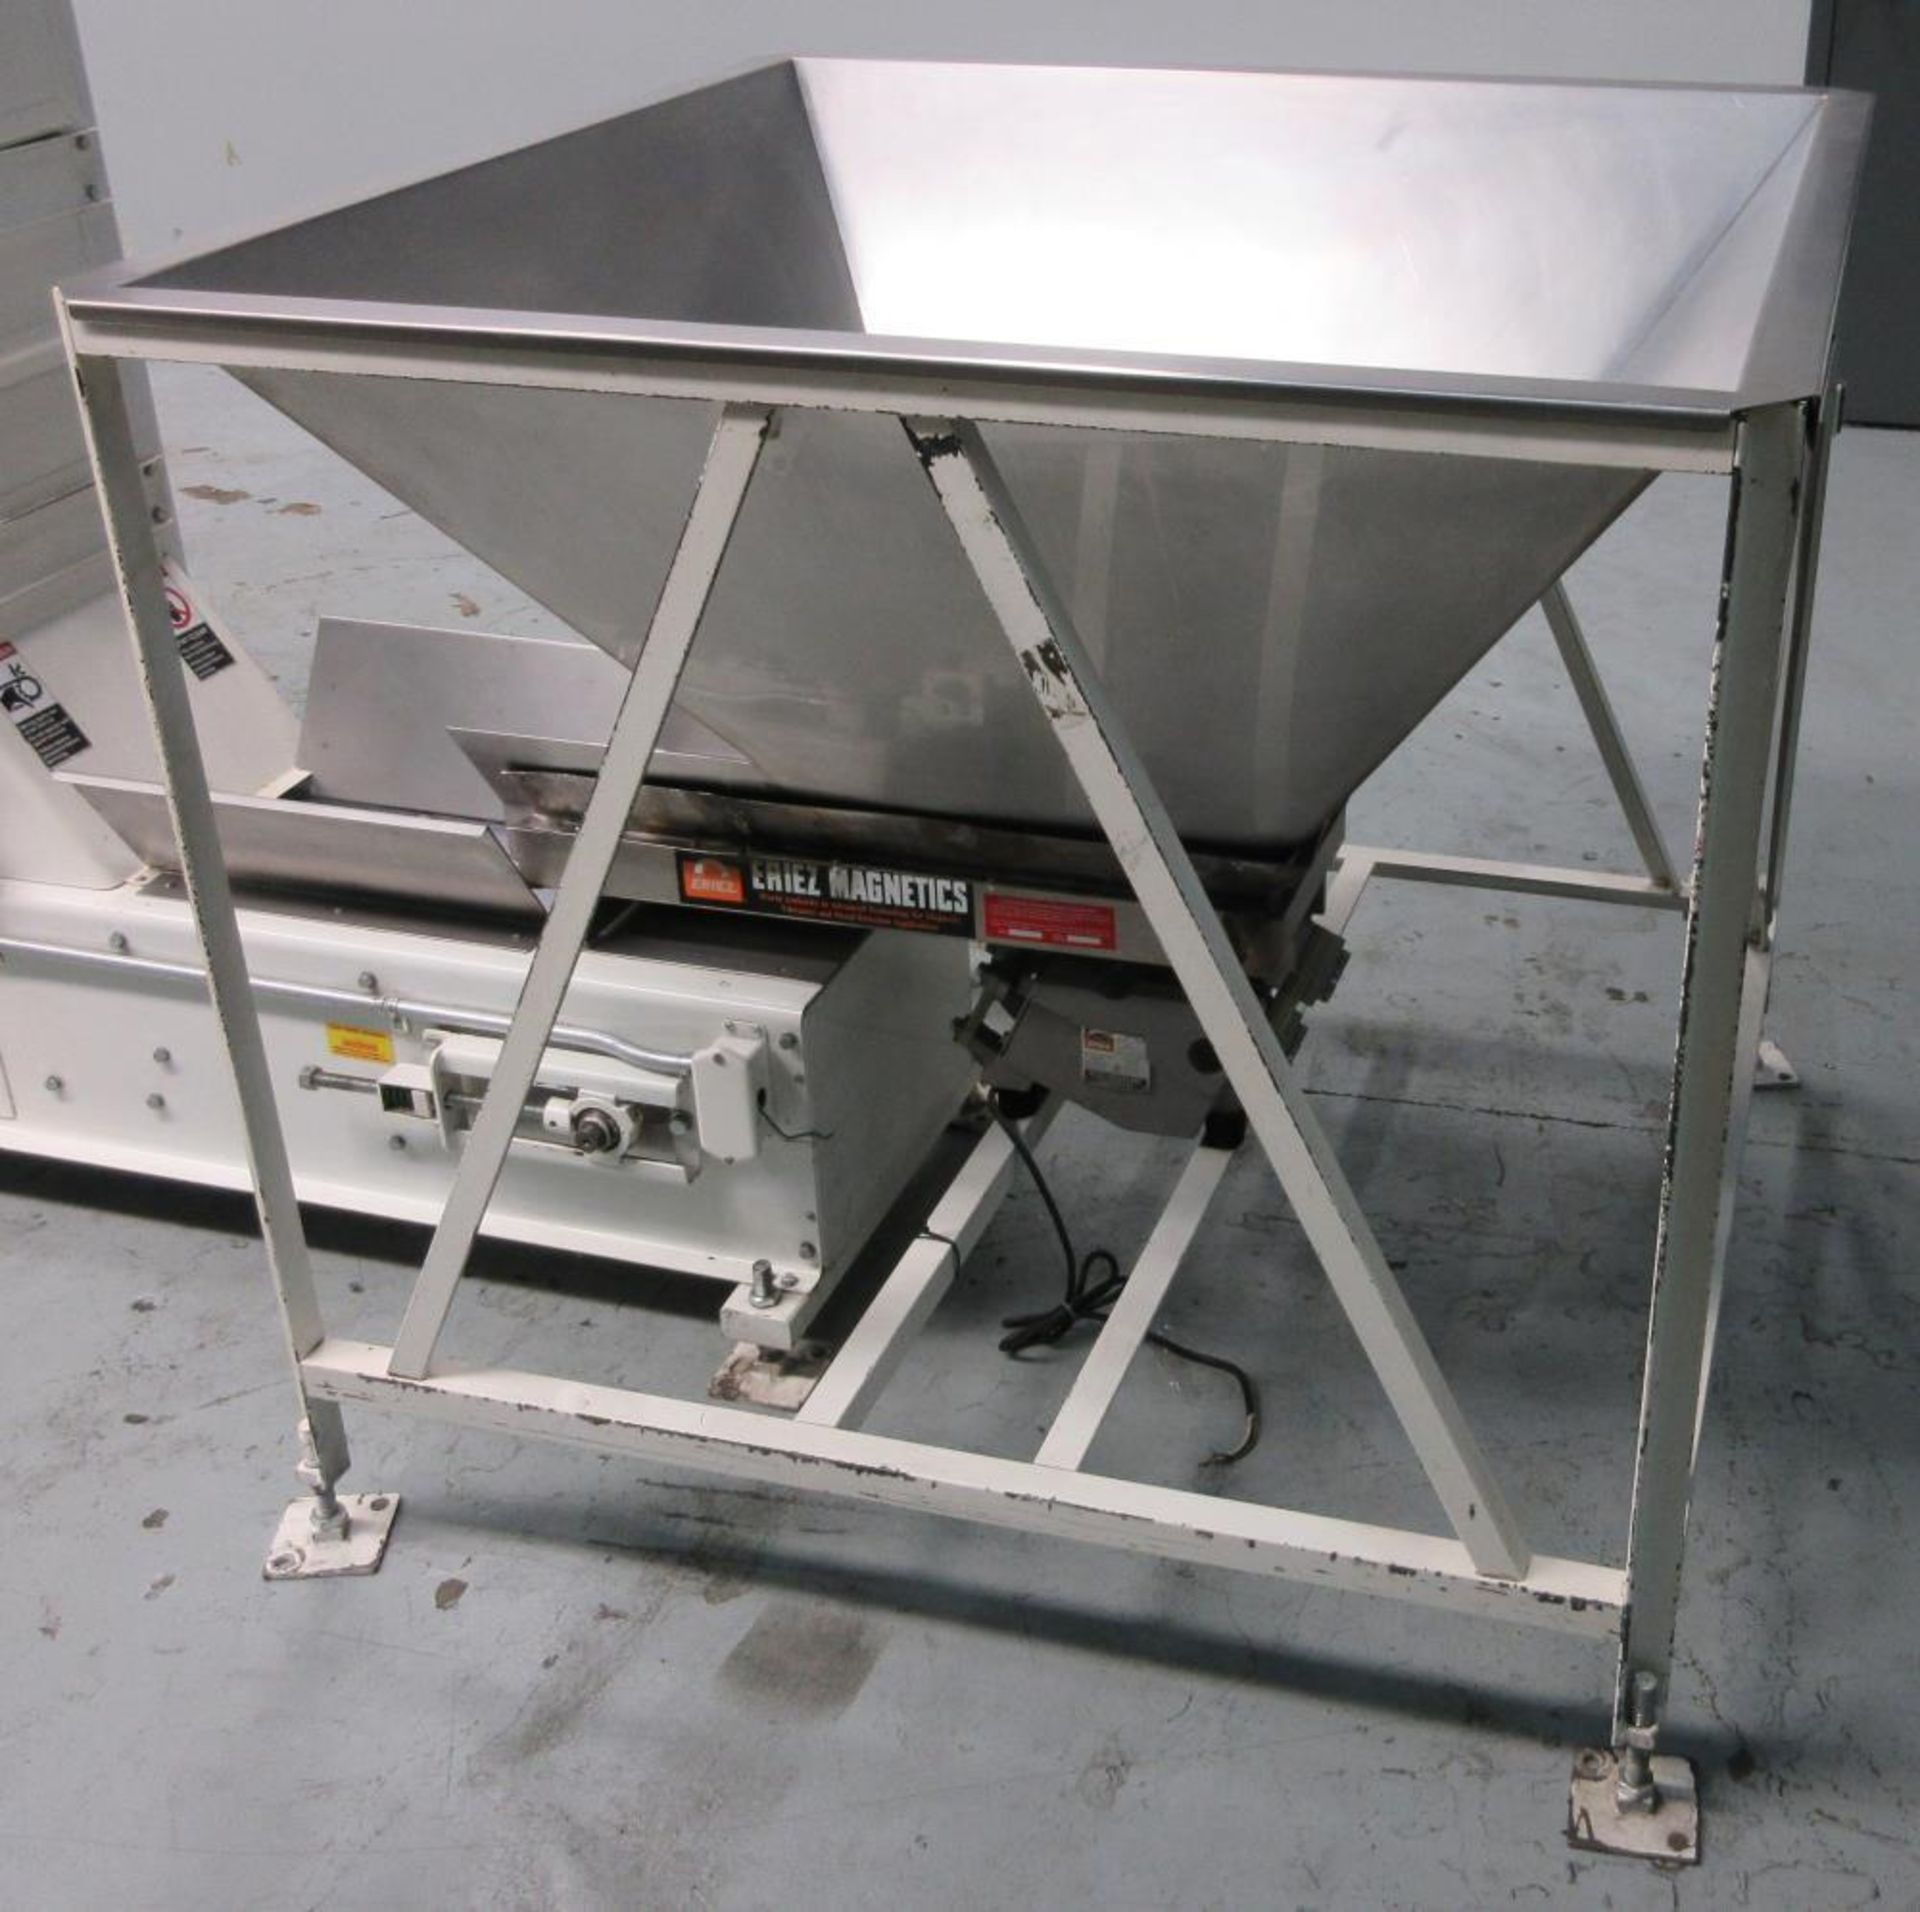 Ropak Model V High-Speed Rotary Pouch Machine with Volumetric Screw Product Feeder - Image 7 of 30